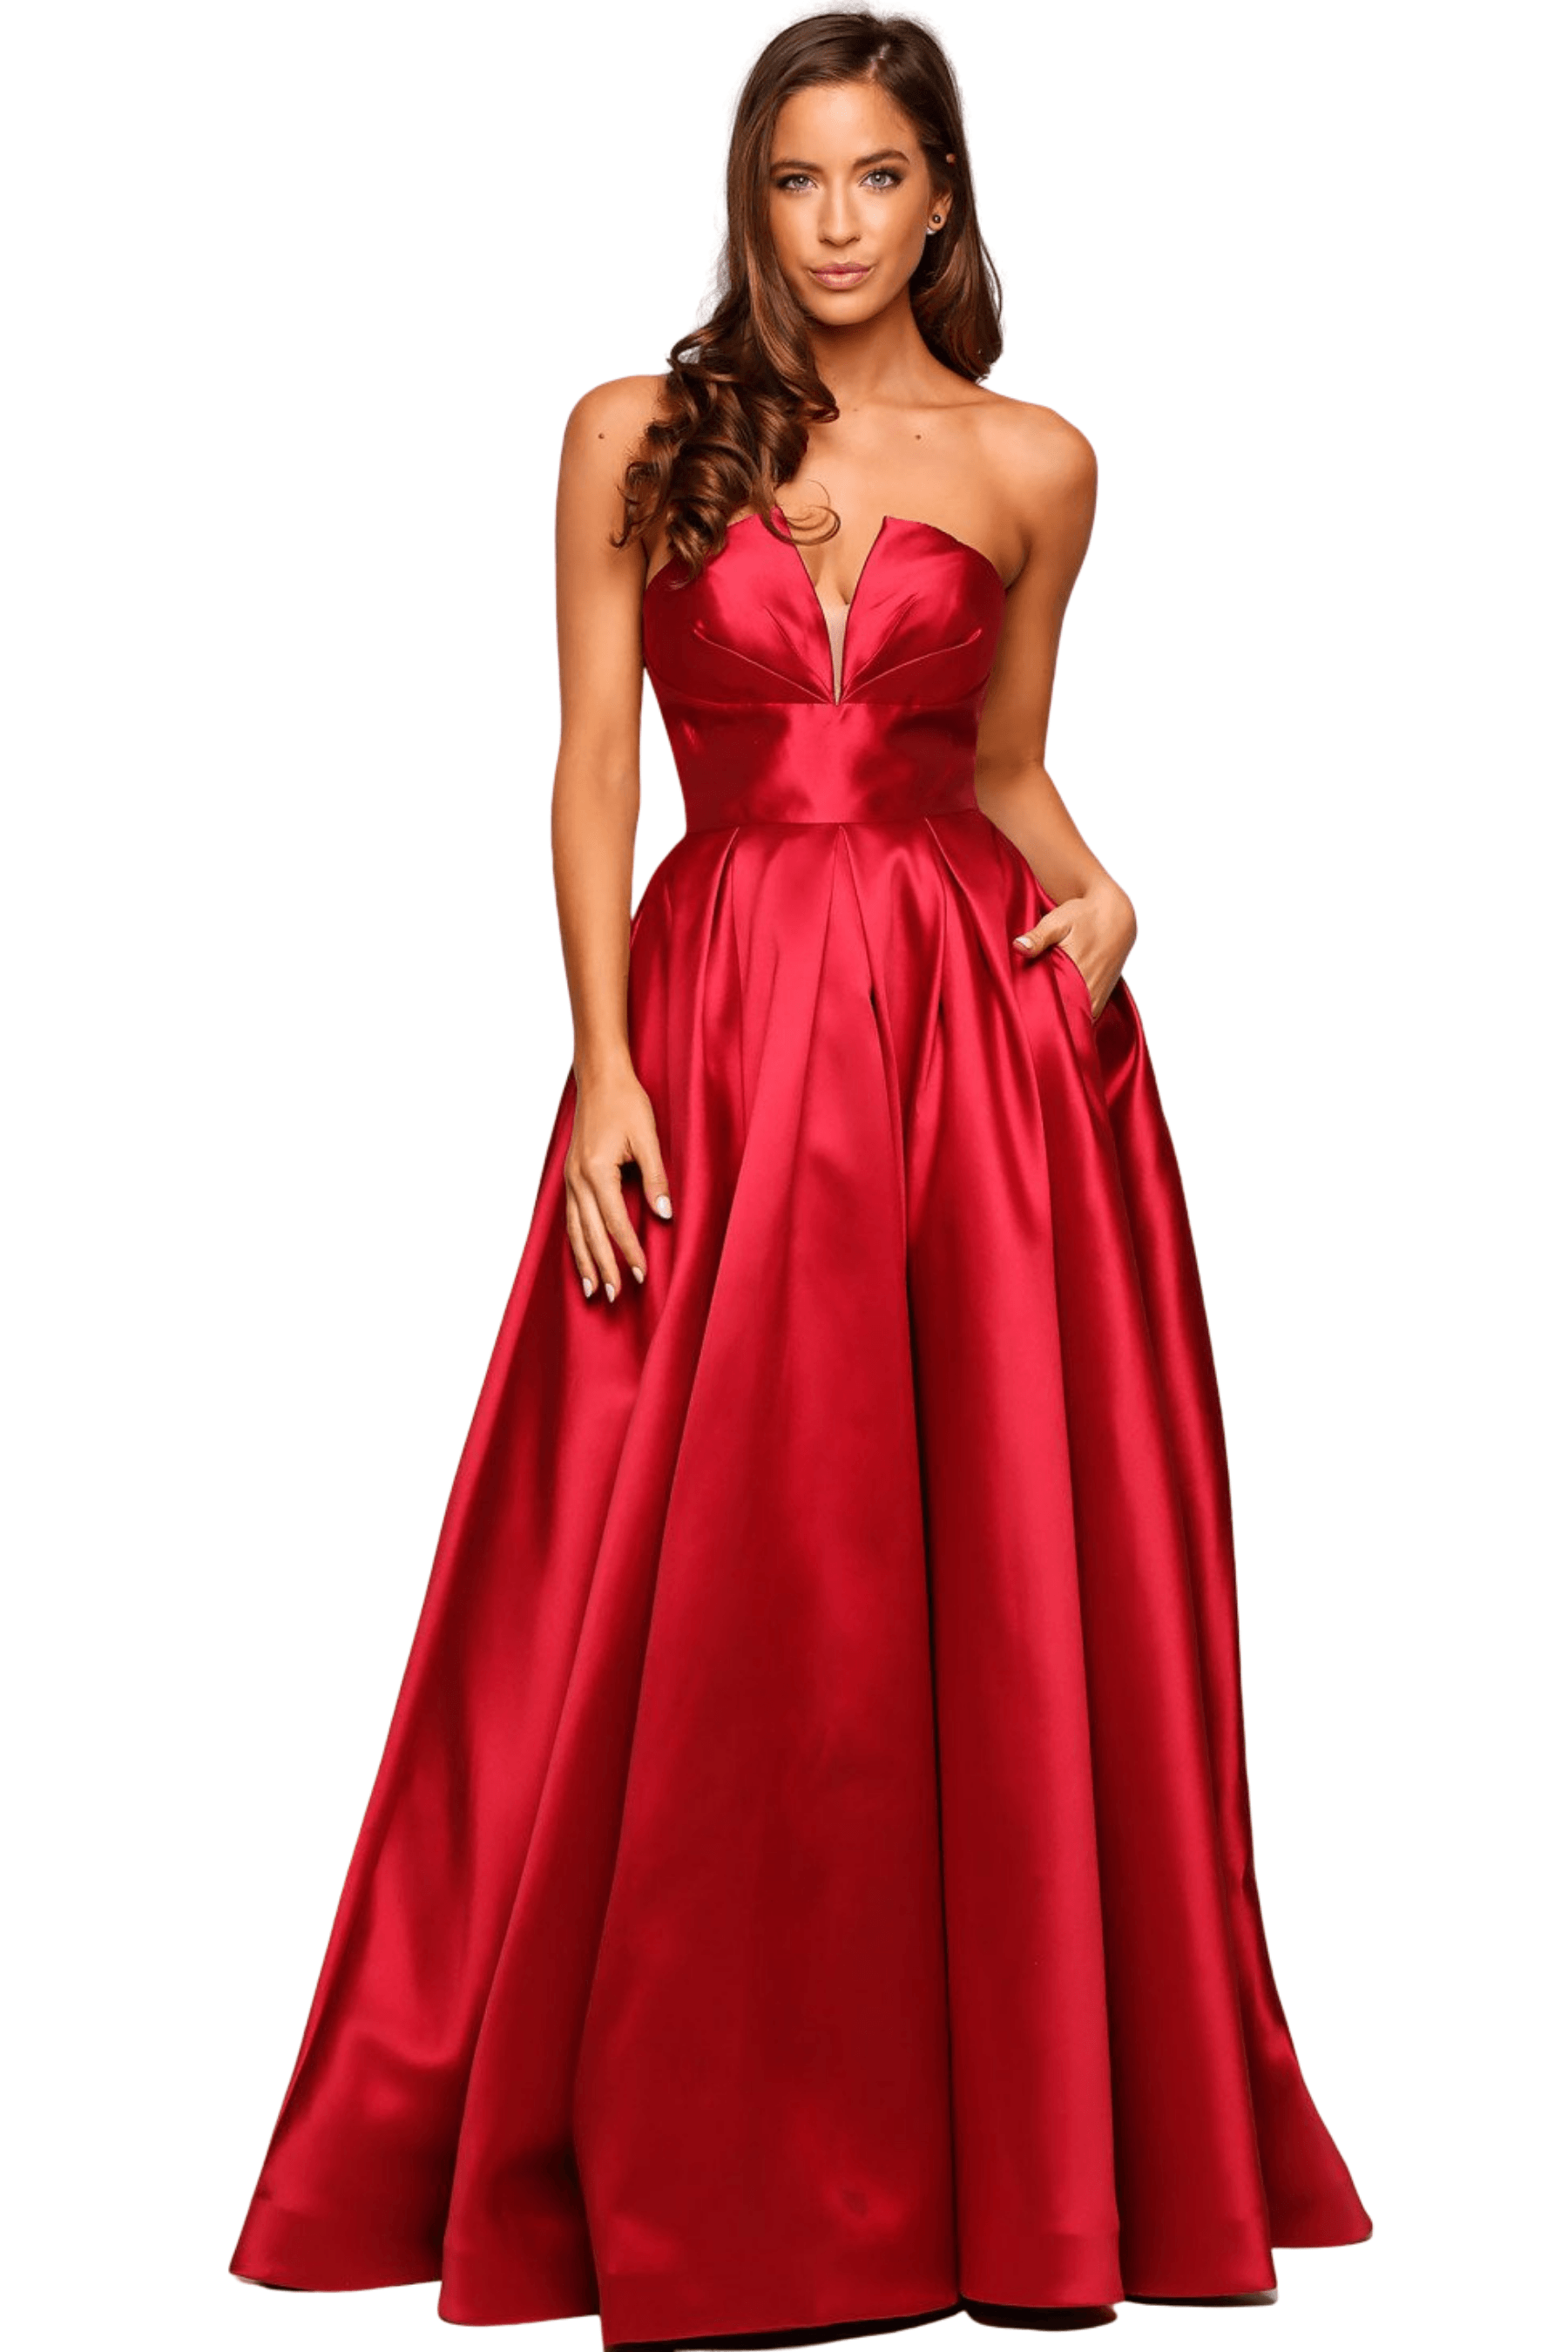 Tinaholy BUY IT TANIA OLSEN Emma Gown PO852-B1 (Red) - tinaholy-lucille-gown-ta611-red---rrp-0-dress-for-a-night-30756956_8a3da571-303a-43c8-a94e-6ec36fd75dd2.png